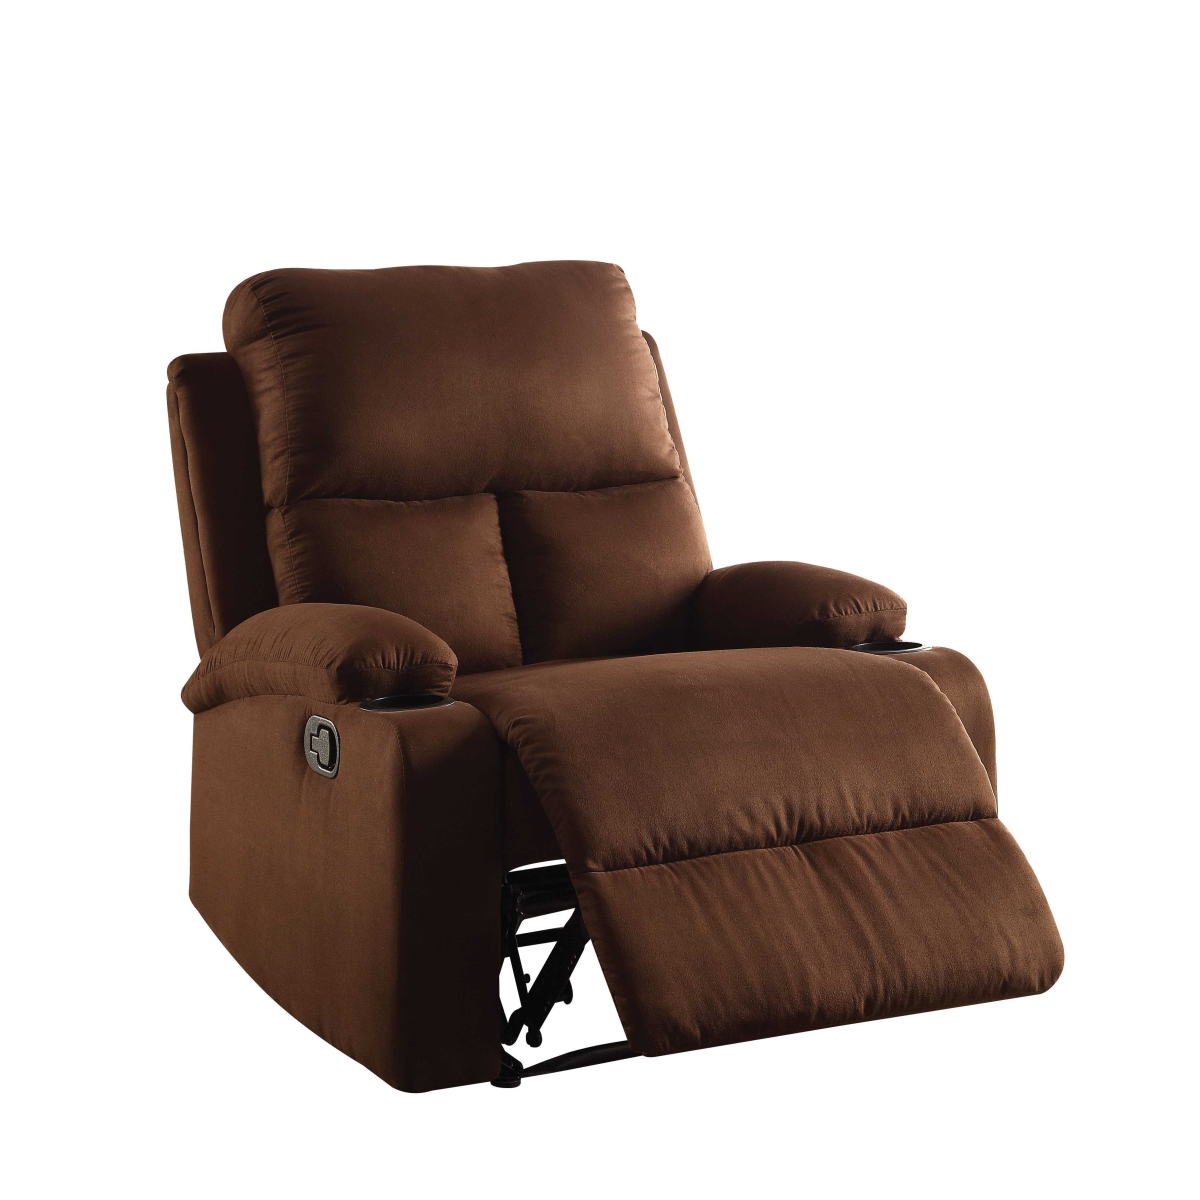 Home Roots Furniture 286185 39 X 32 X 37 In. Microfiber & Wood Frame Recliner - Chocolate